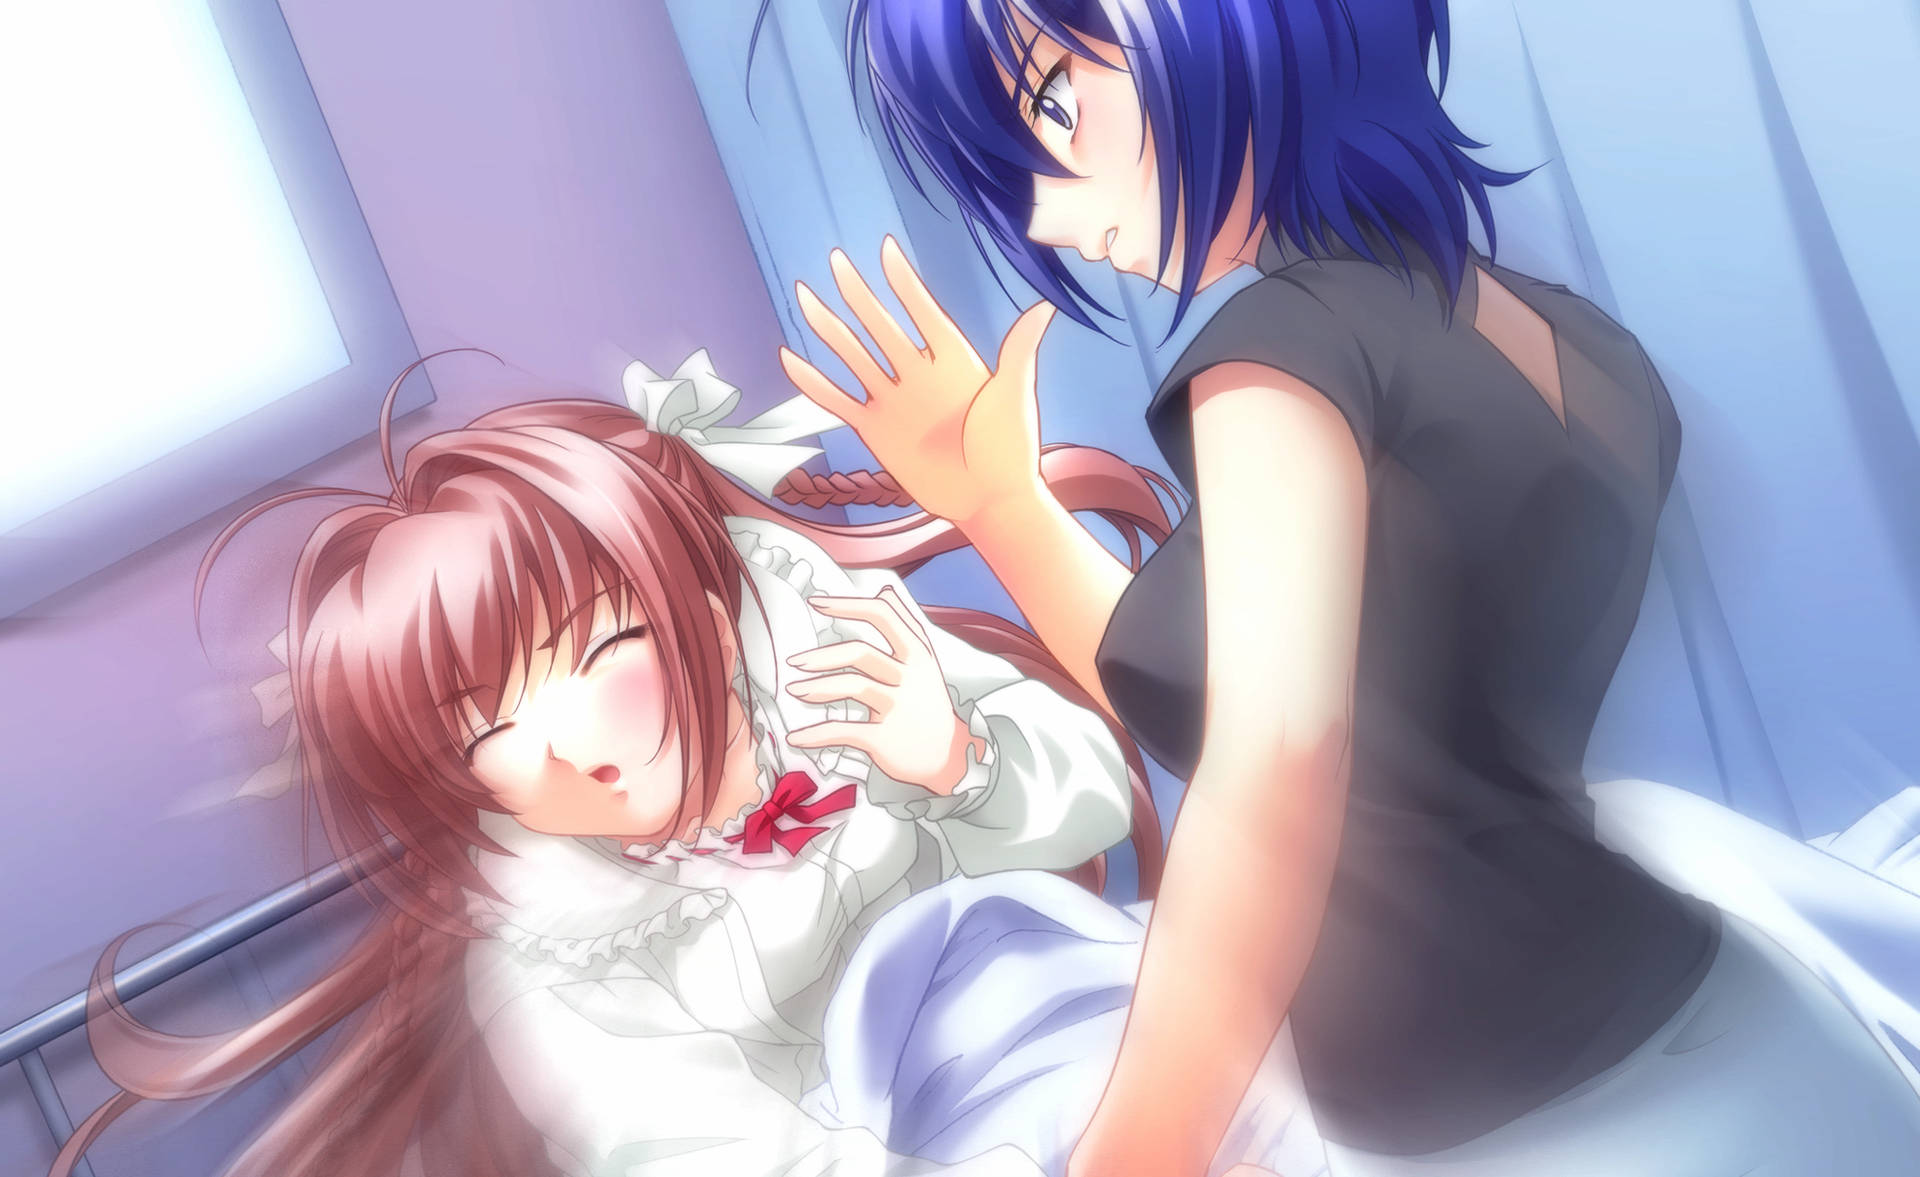 Blurry Illustration Of Characters From Kimi Ga Nozomu Eien